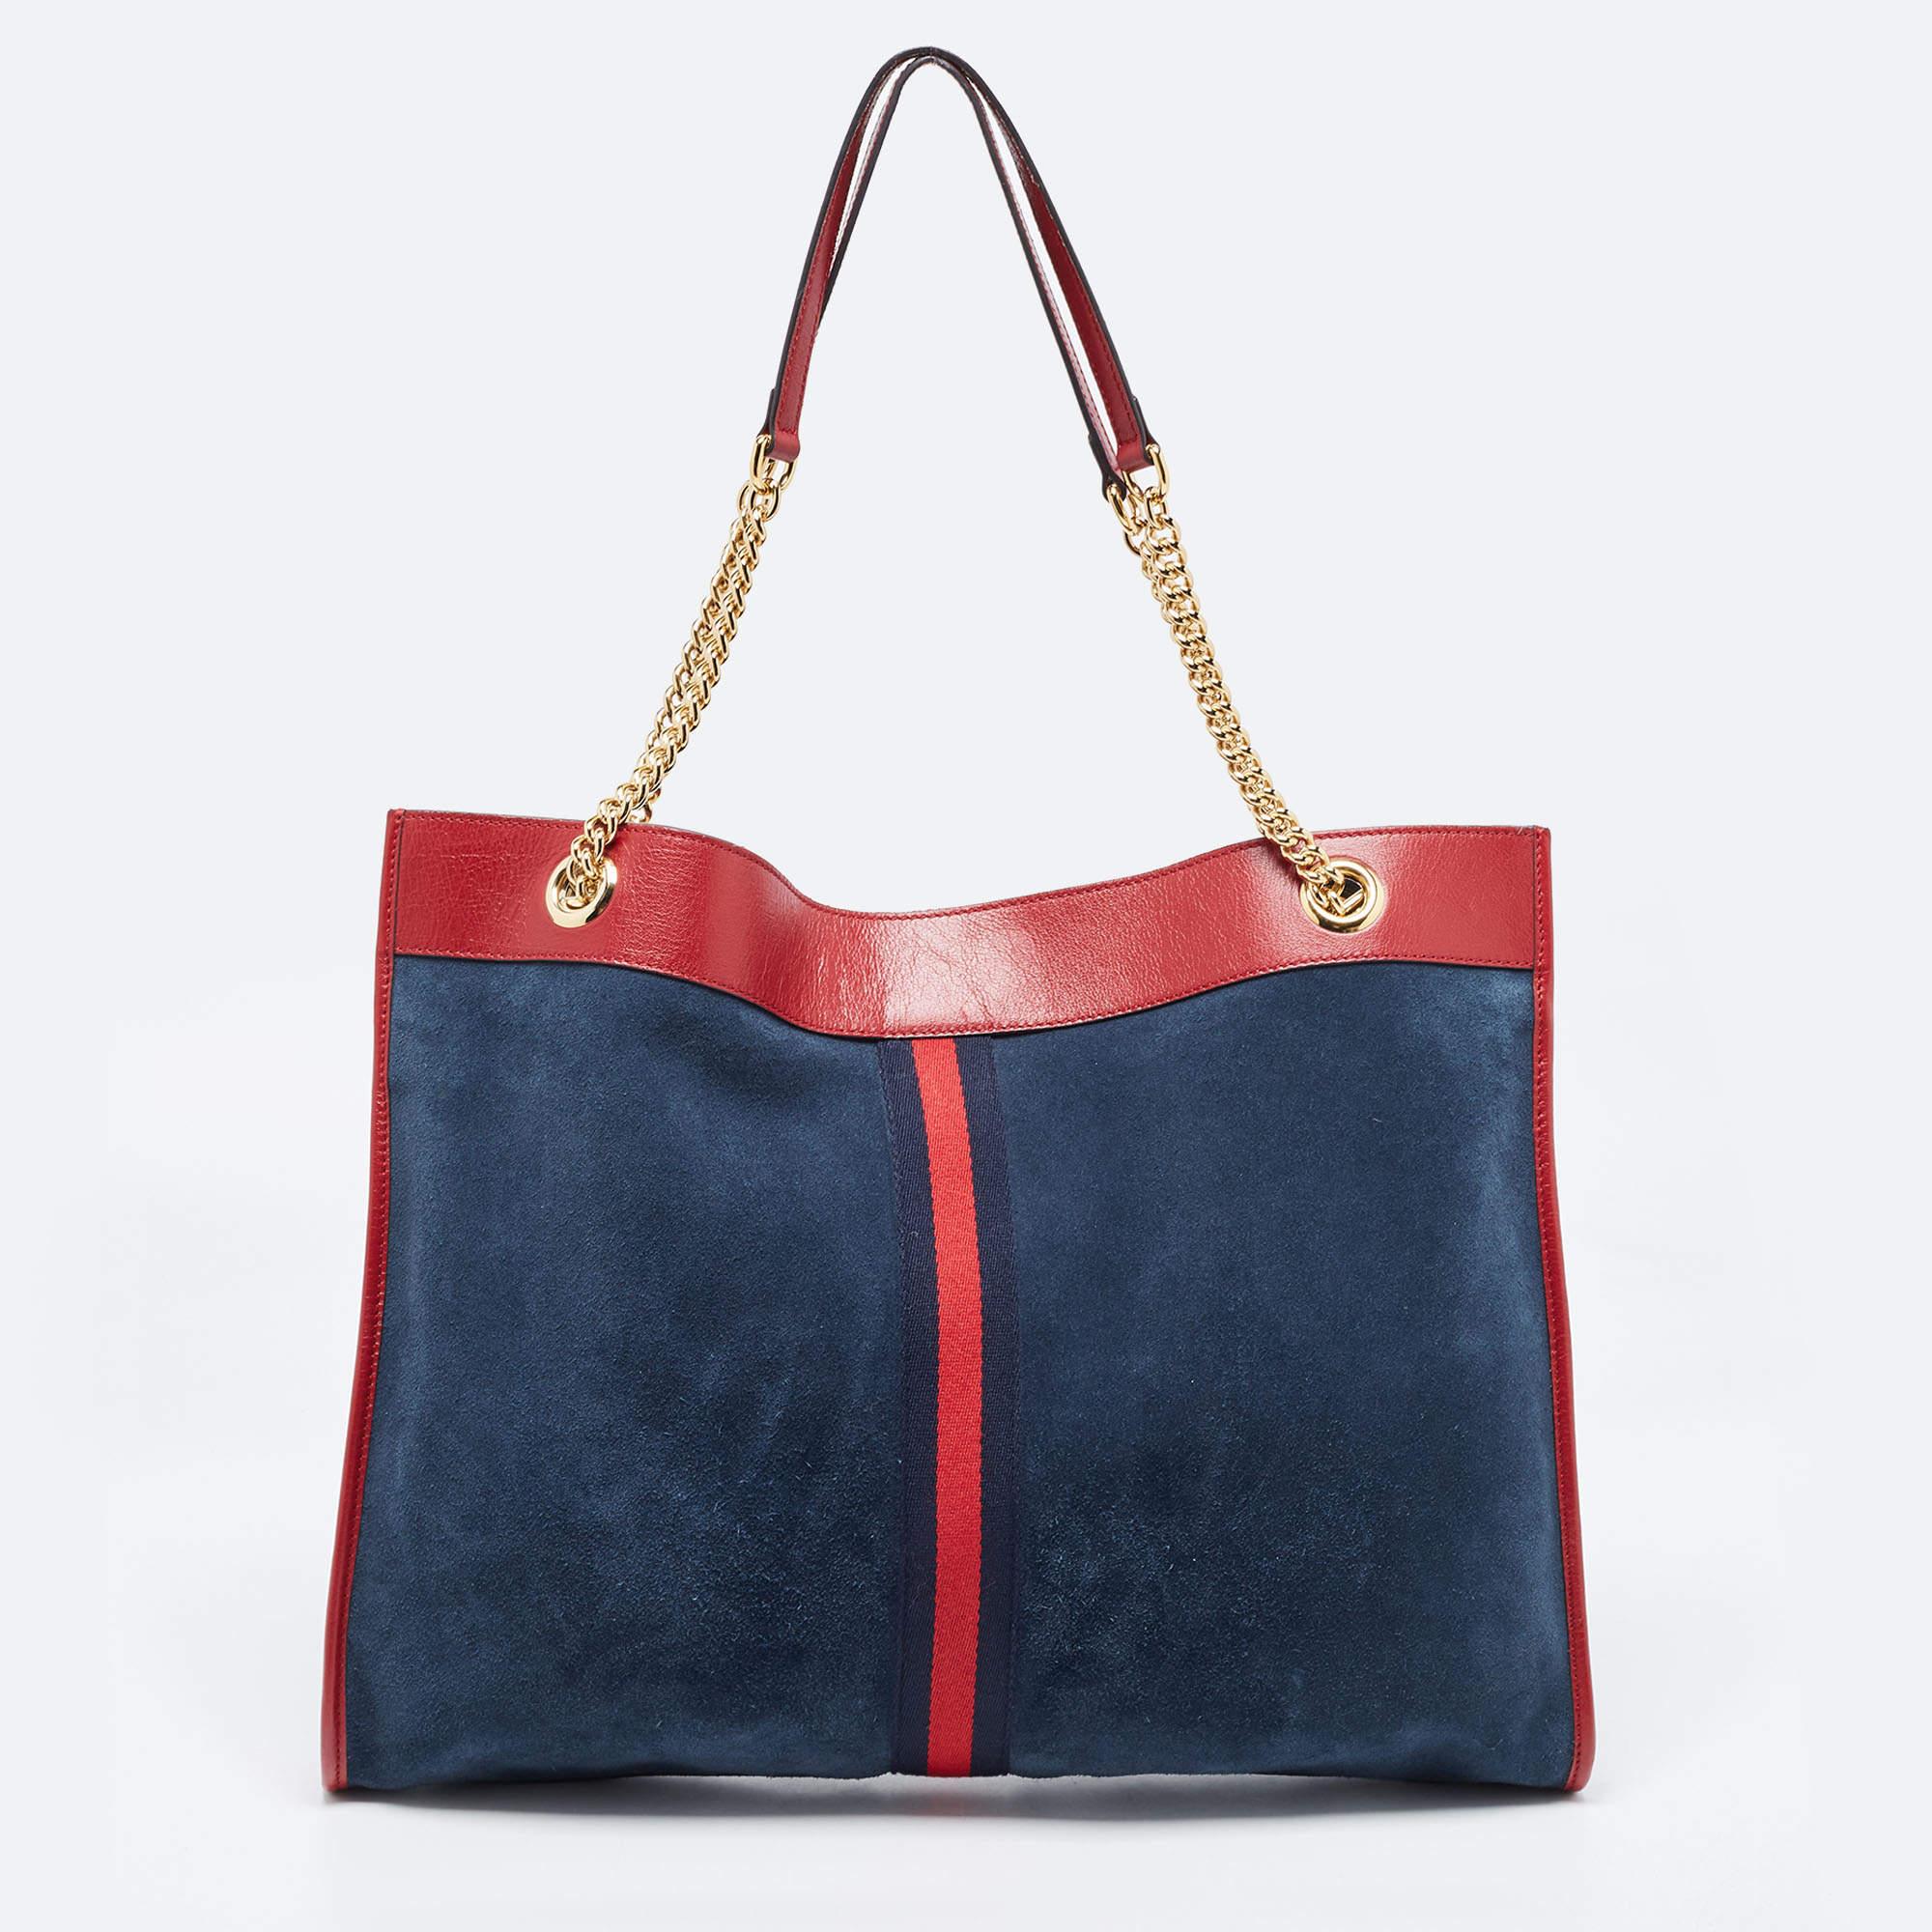 This beautifully stitched signature canvas and leather tote is by Gucci. With a capacious leather-lined interior, it promises to house more than your essentials. Boasting two handles and a fine finish, this tote offers style and practical ease.

